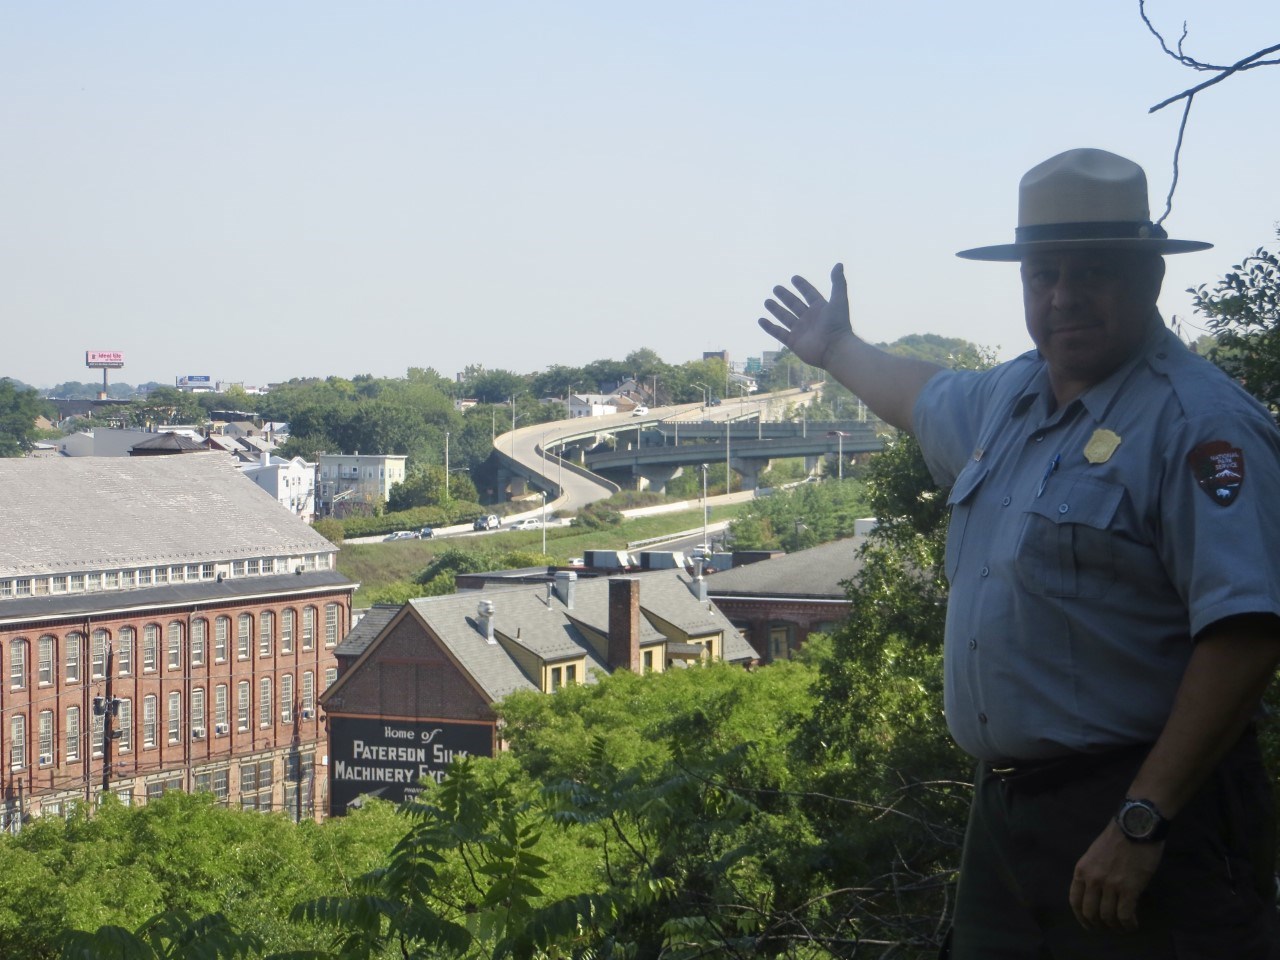 A uniformed Park Ranger gesturing towards historic red brick mill buildings, a highway interchange visible in the background